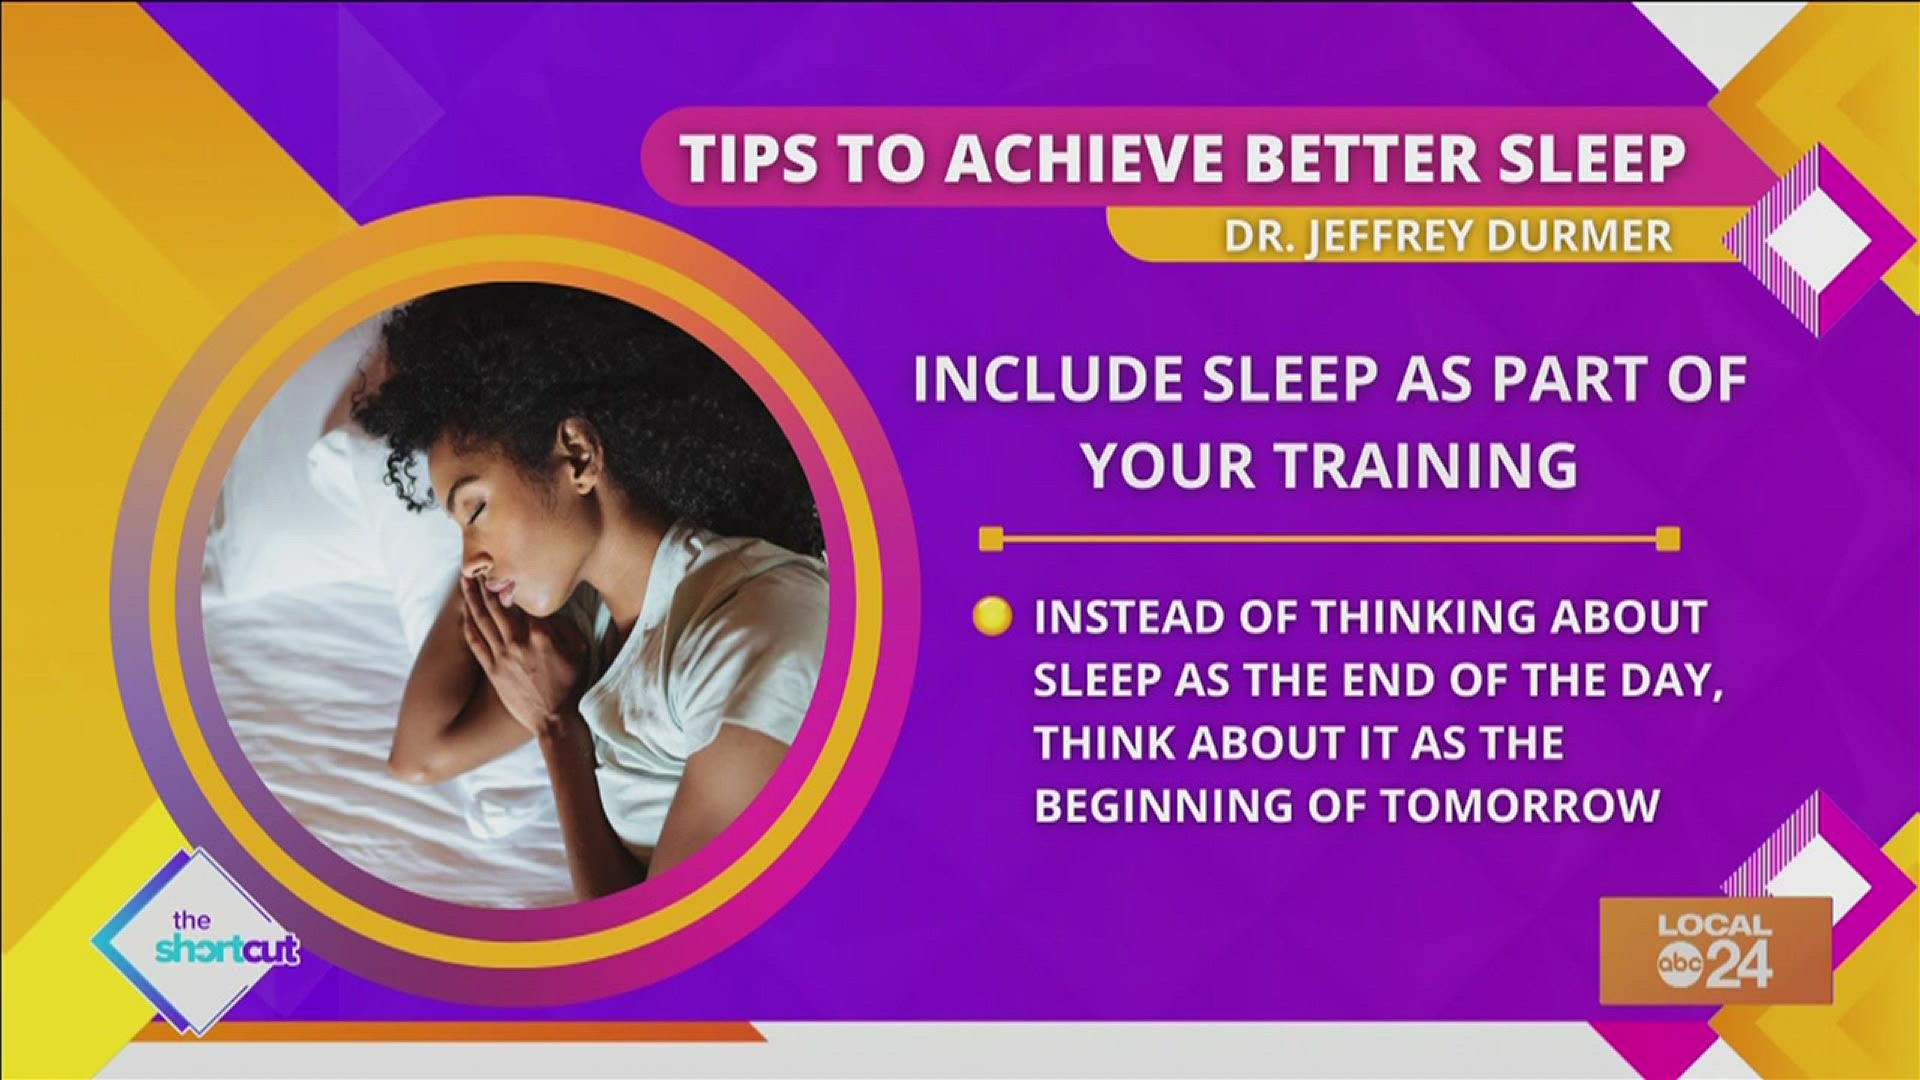 Whether you're going for the gold or looking to live a longer, happier life, sleeping like an Olympian using Dr. Durmer's tips can get to where you need to be!